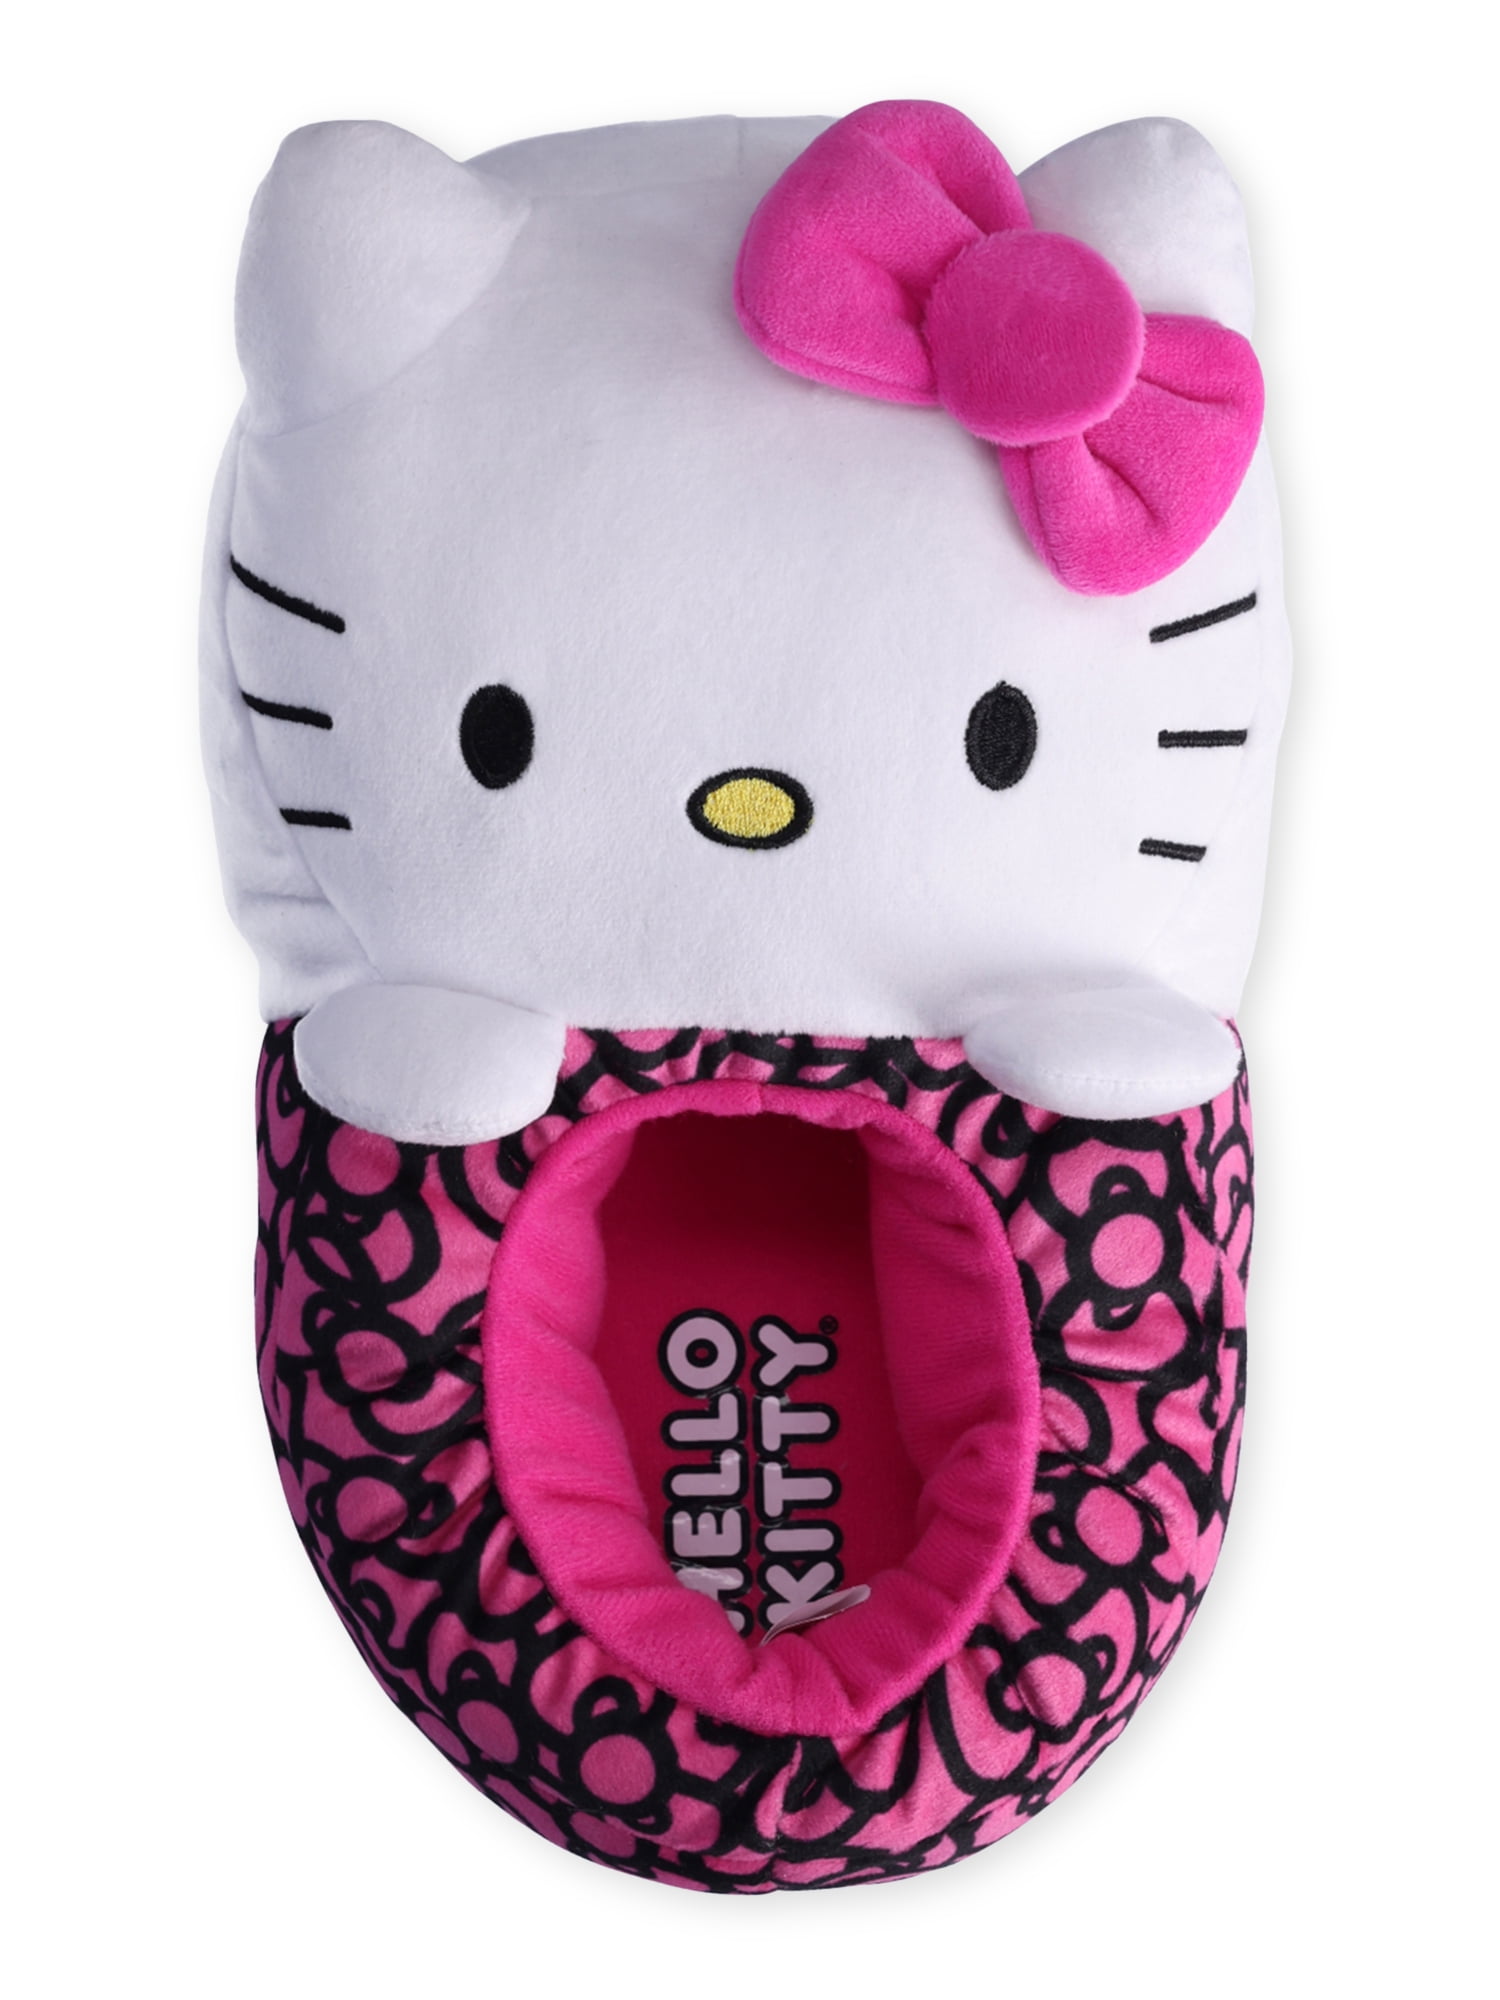 Hello Kitty Women’s Slippers: 3D Character Plush Velour Slippers $13.32,  Embroidered Velour Slide Slippers $12.17 + Free Shipping w/ Walmart+ or on $35+